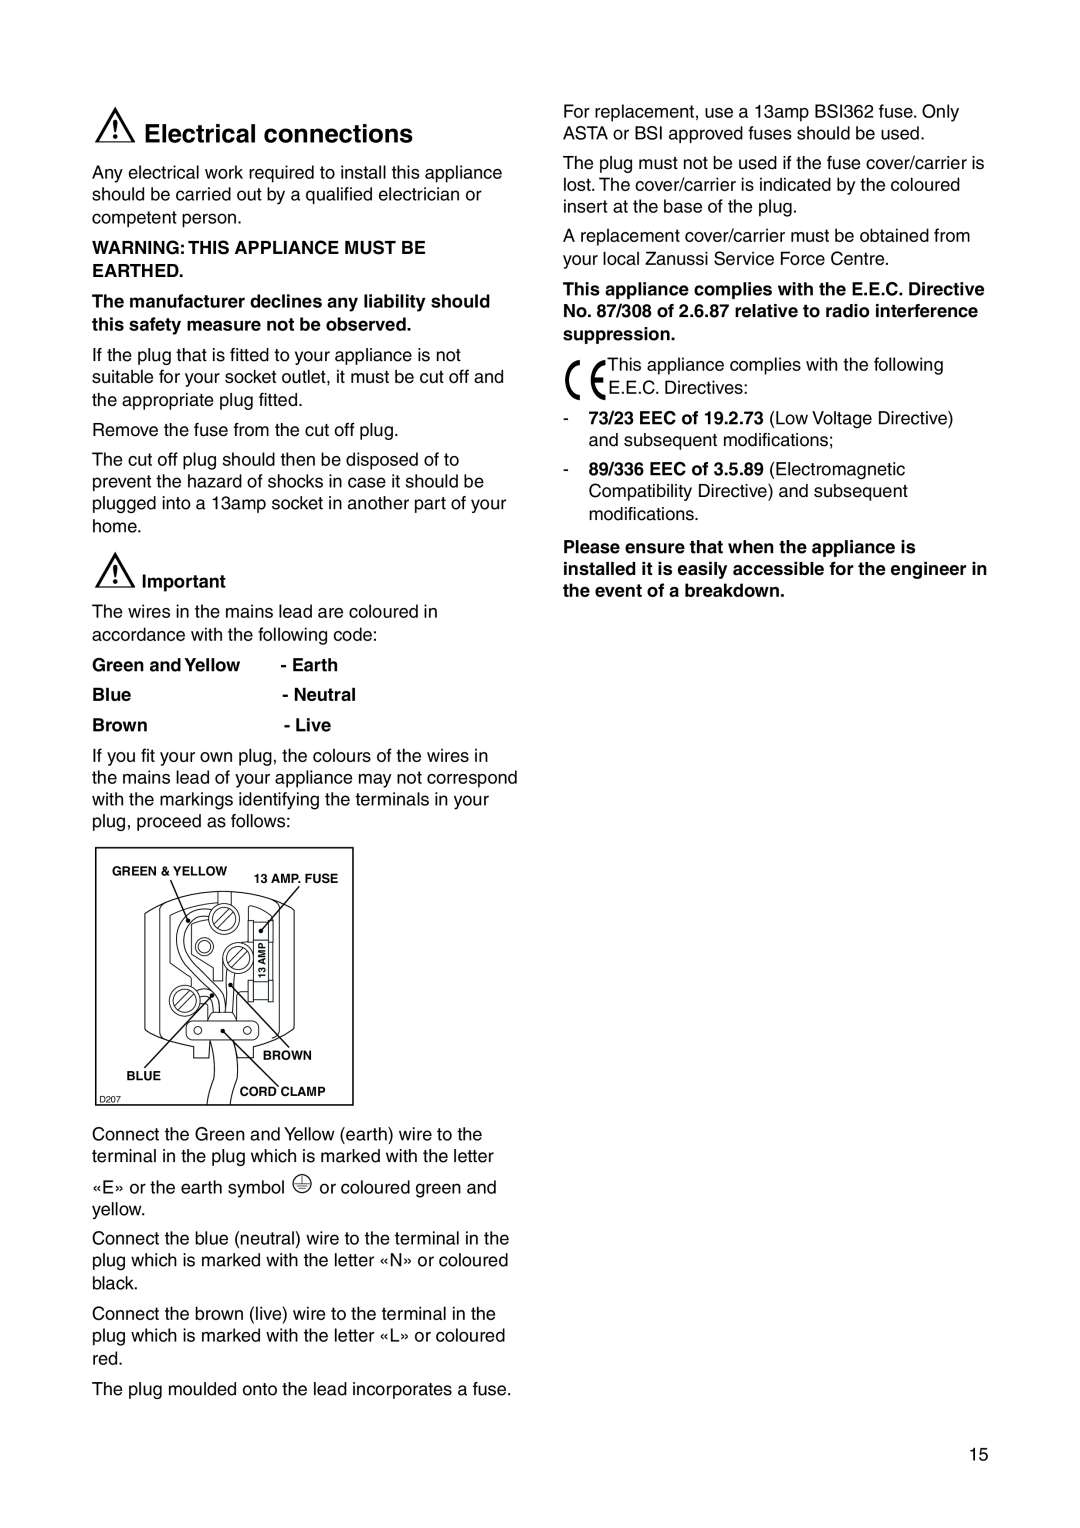 Zanussi ZI 921/8 FF manual Electrical connections, Warning: This Appliance Must Be Earthed, Green and Yellow 